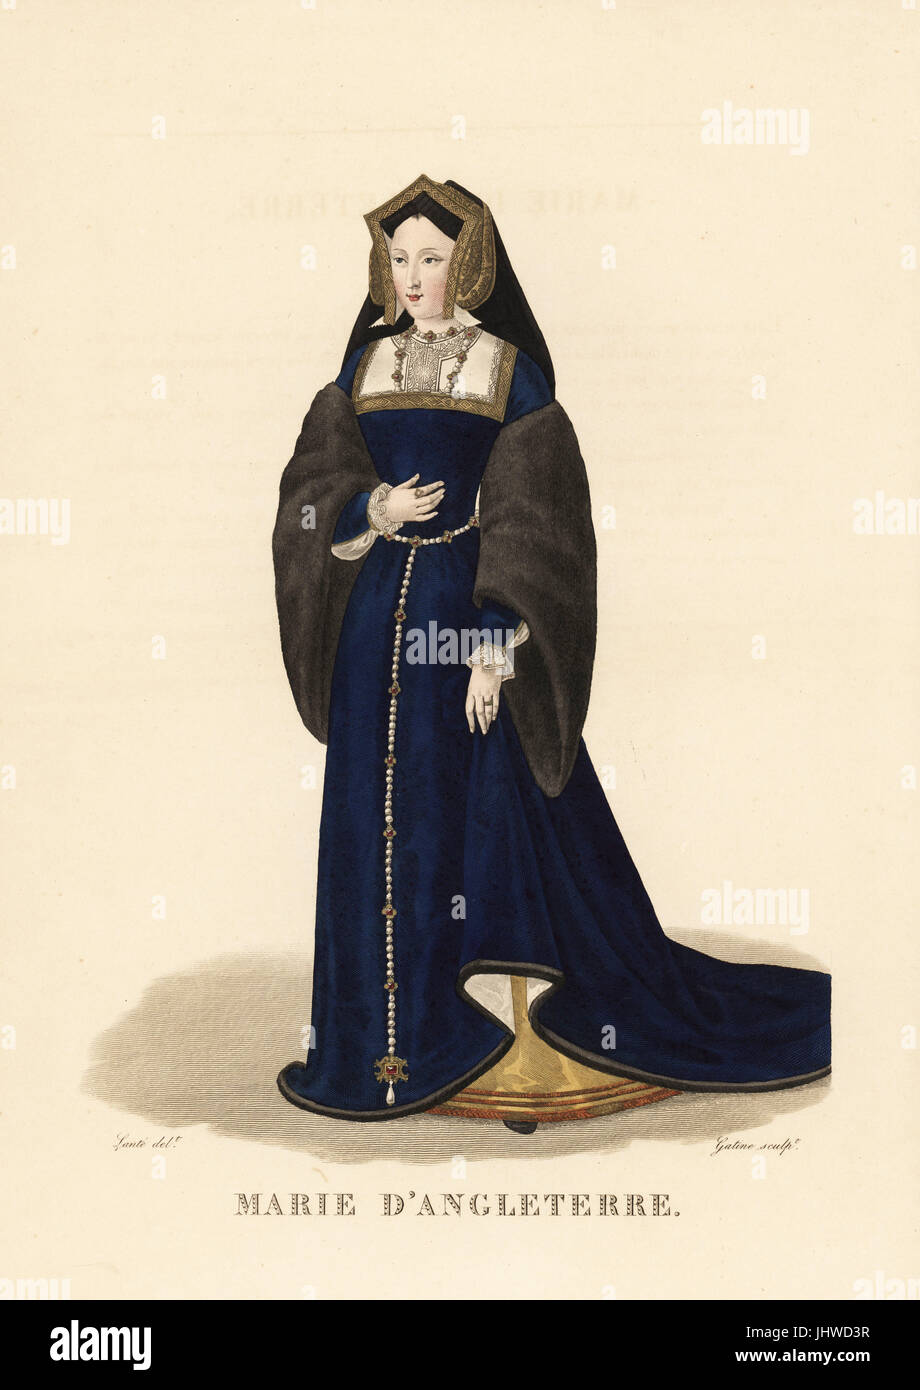 Mary Tudor, daughter of Henry VII of England, queen to King Louis XII of France, 1496-1533. She wears a gable hood, a blue velvet surtout trimmed with gold embroidery, fur sleeves called rebras, a jeweled belt, and Venetian flat shoes called pianelles. Handcoloured copperplate engraving by Georges Jacques Gatine after an illustration by Louis Marie Lante from Galerie Francaise de Femmes Celebres, Paris, 1827. Stock Photo